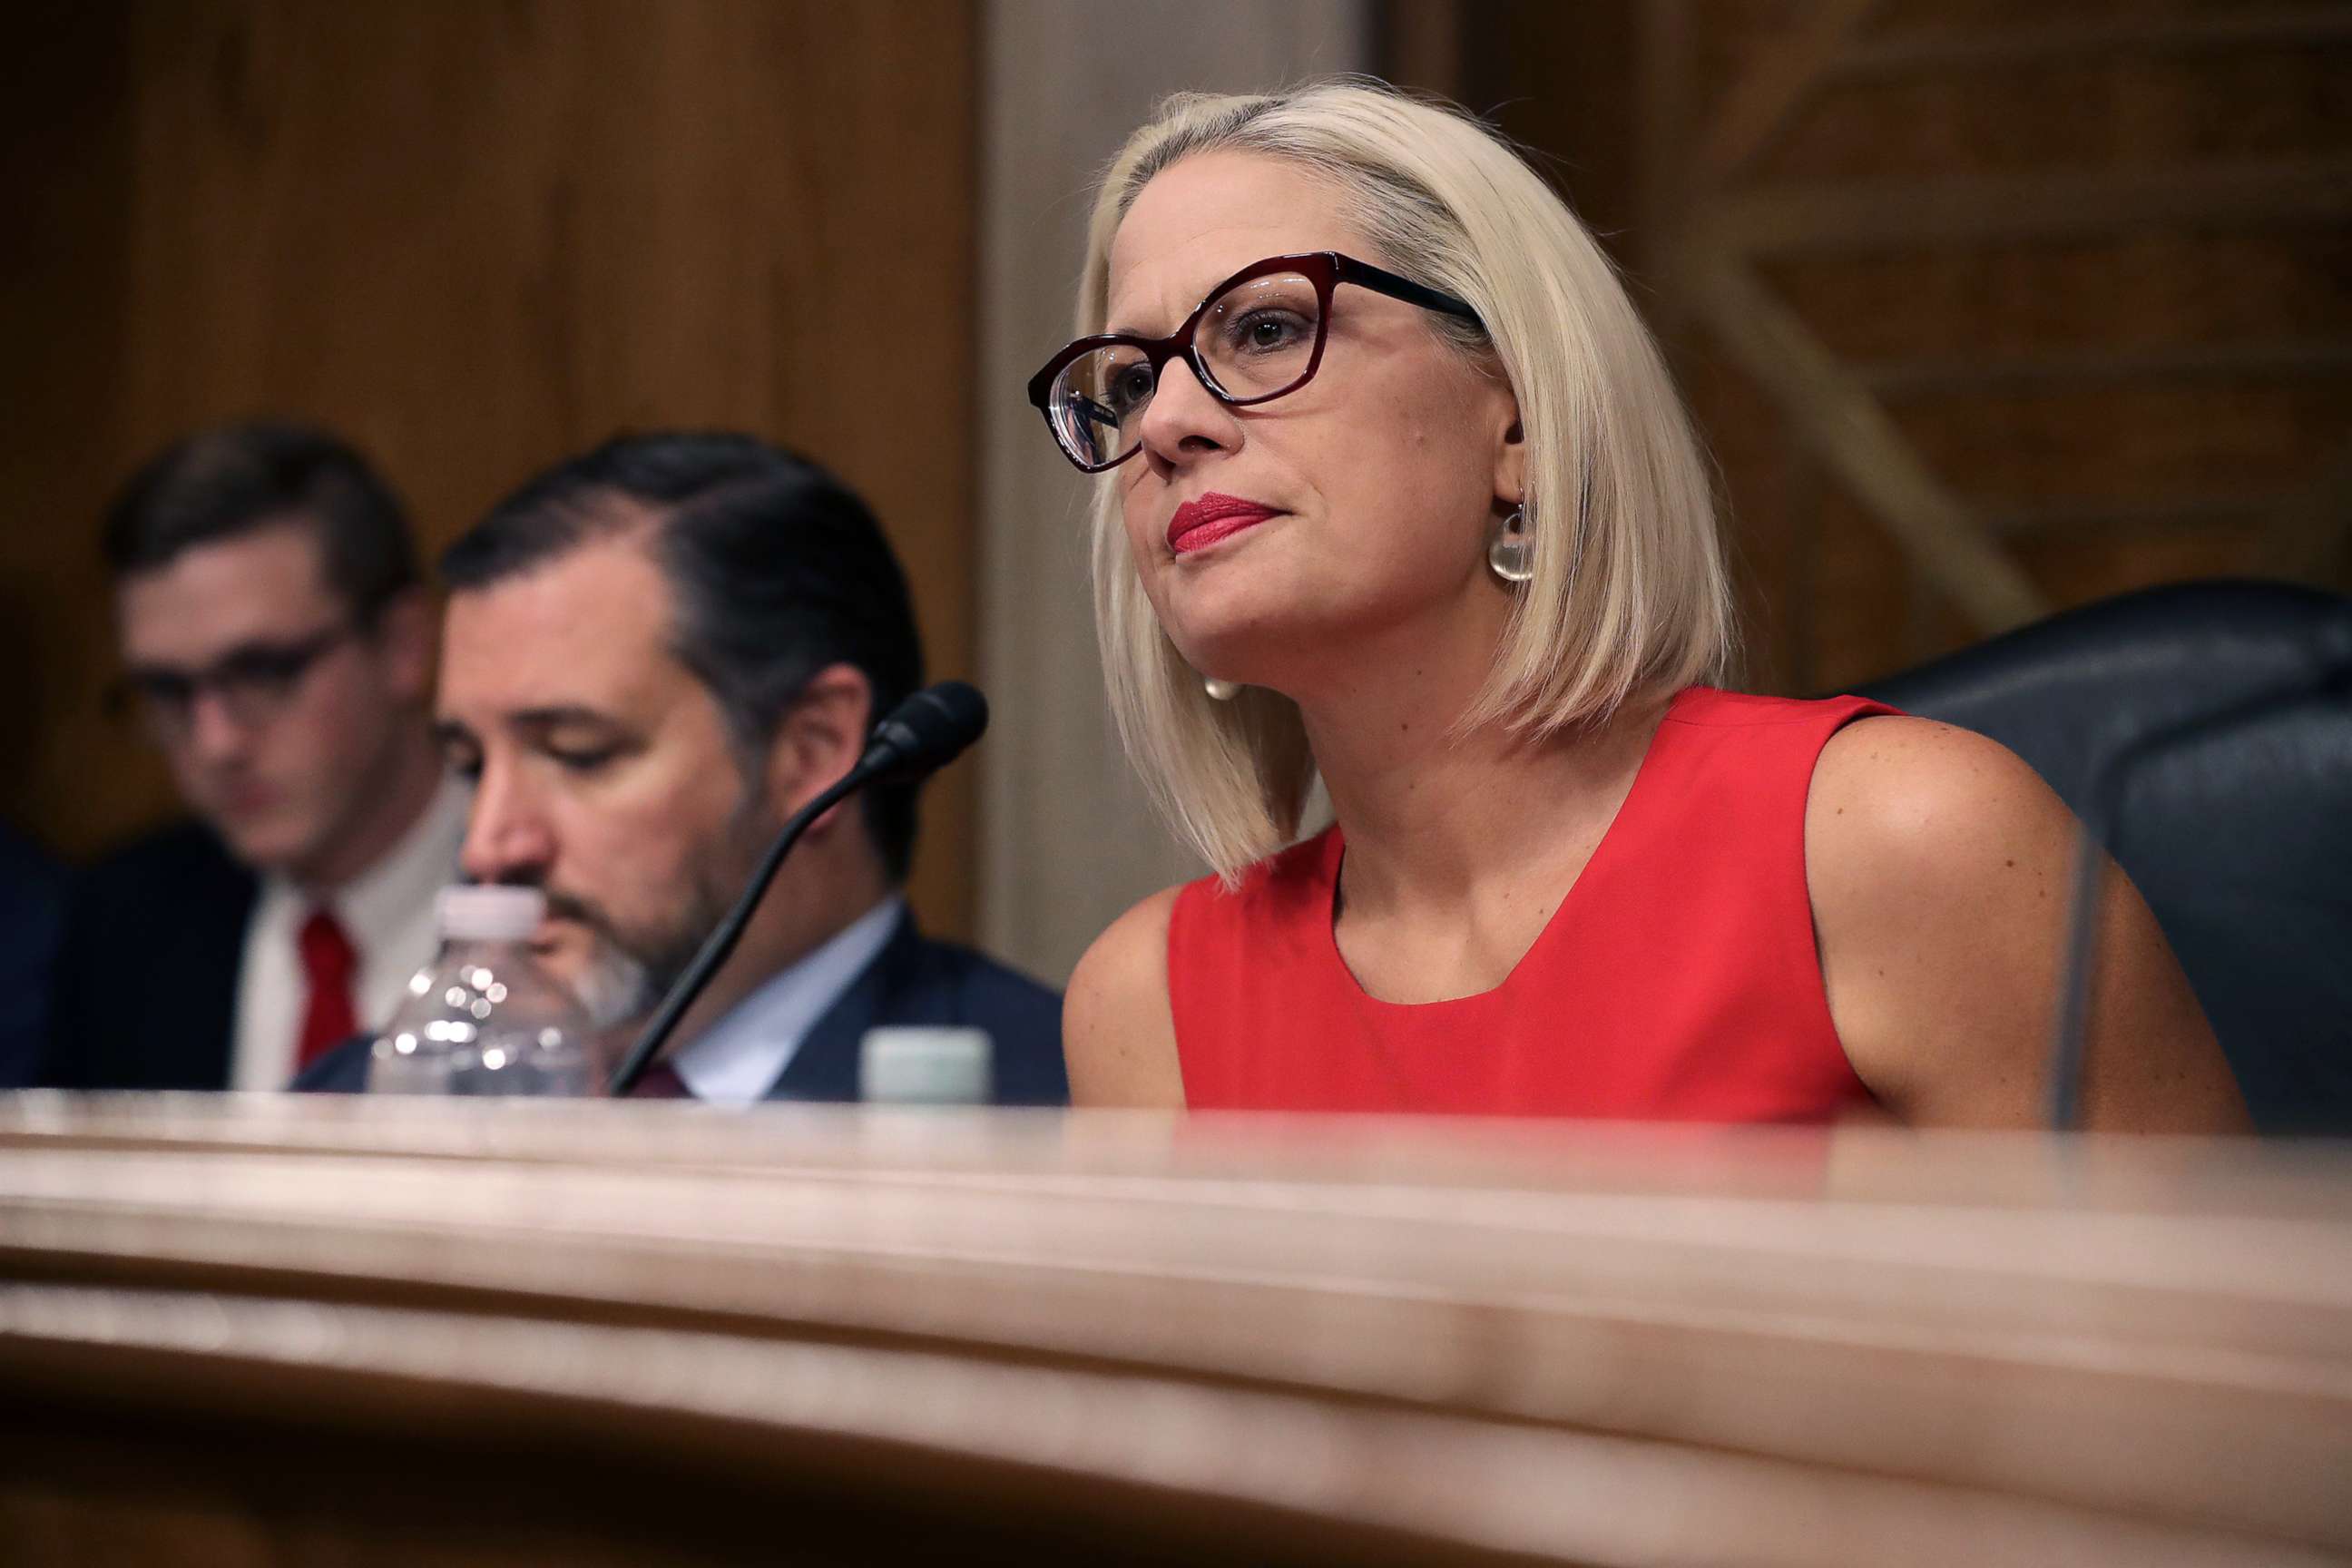 PHOTO: Sen. Kyrsten Sinema questions witnesses during a hearing in the Dirksen Senate Office Building on Capitol Hill, May 14, 2019, in Washington, D.C.